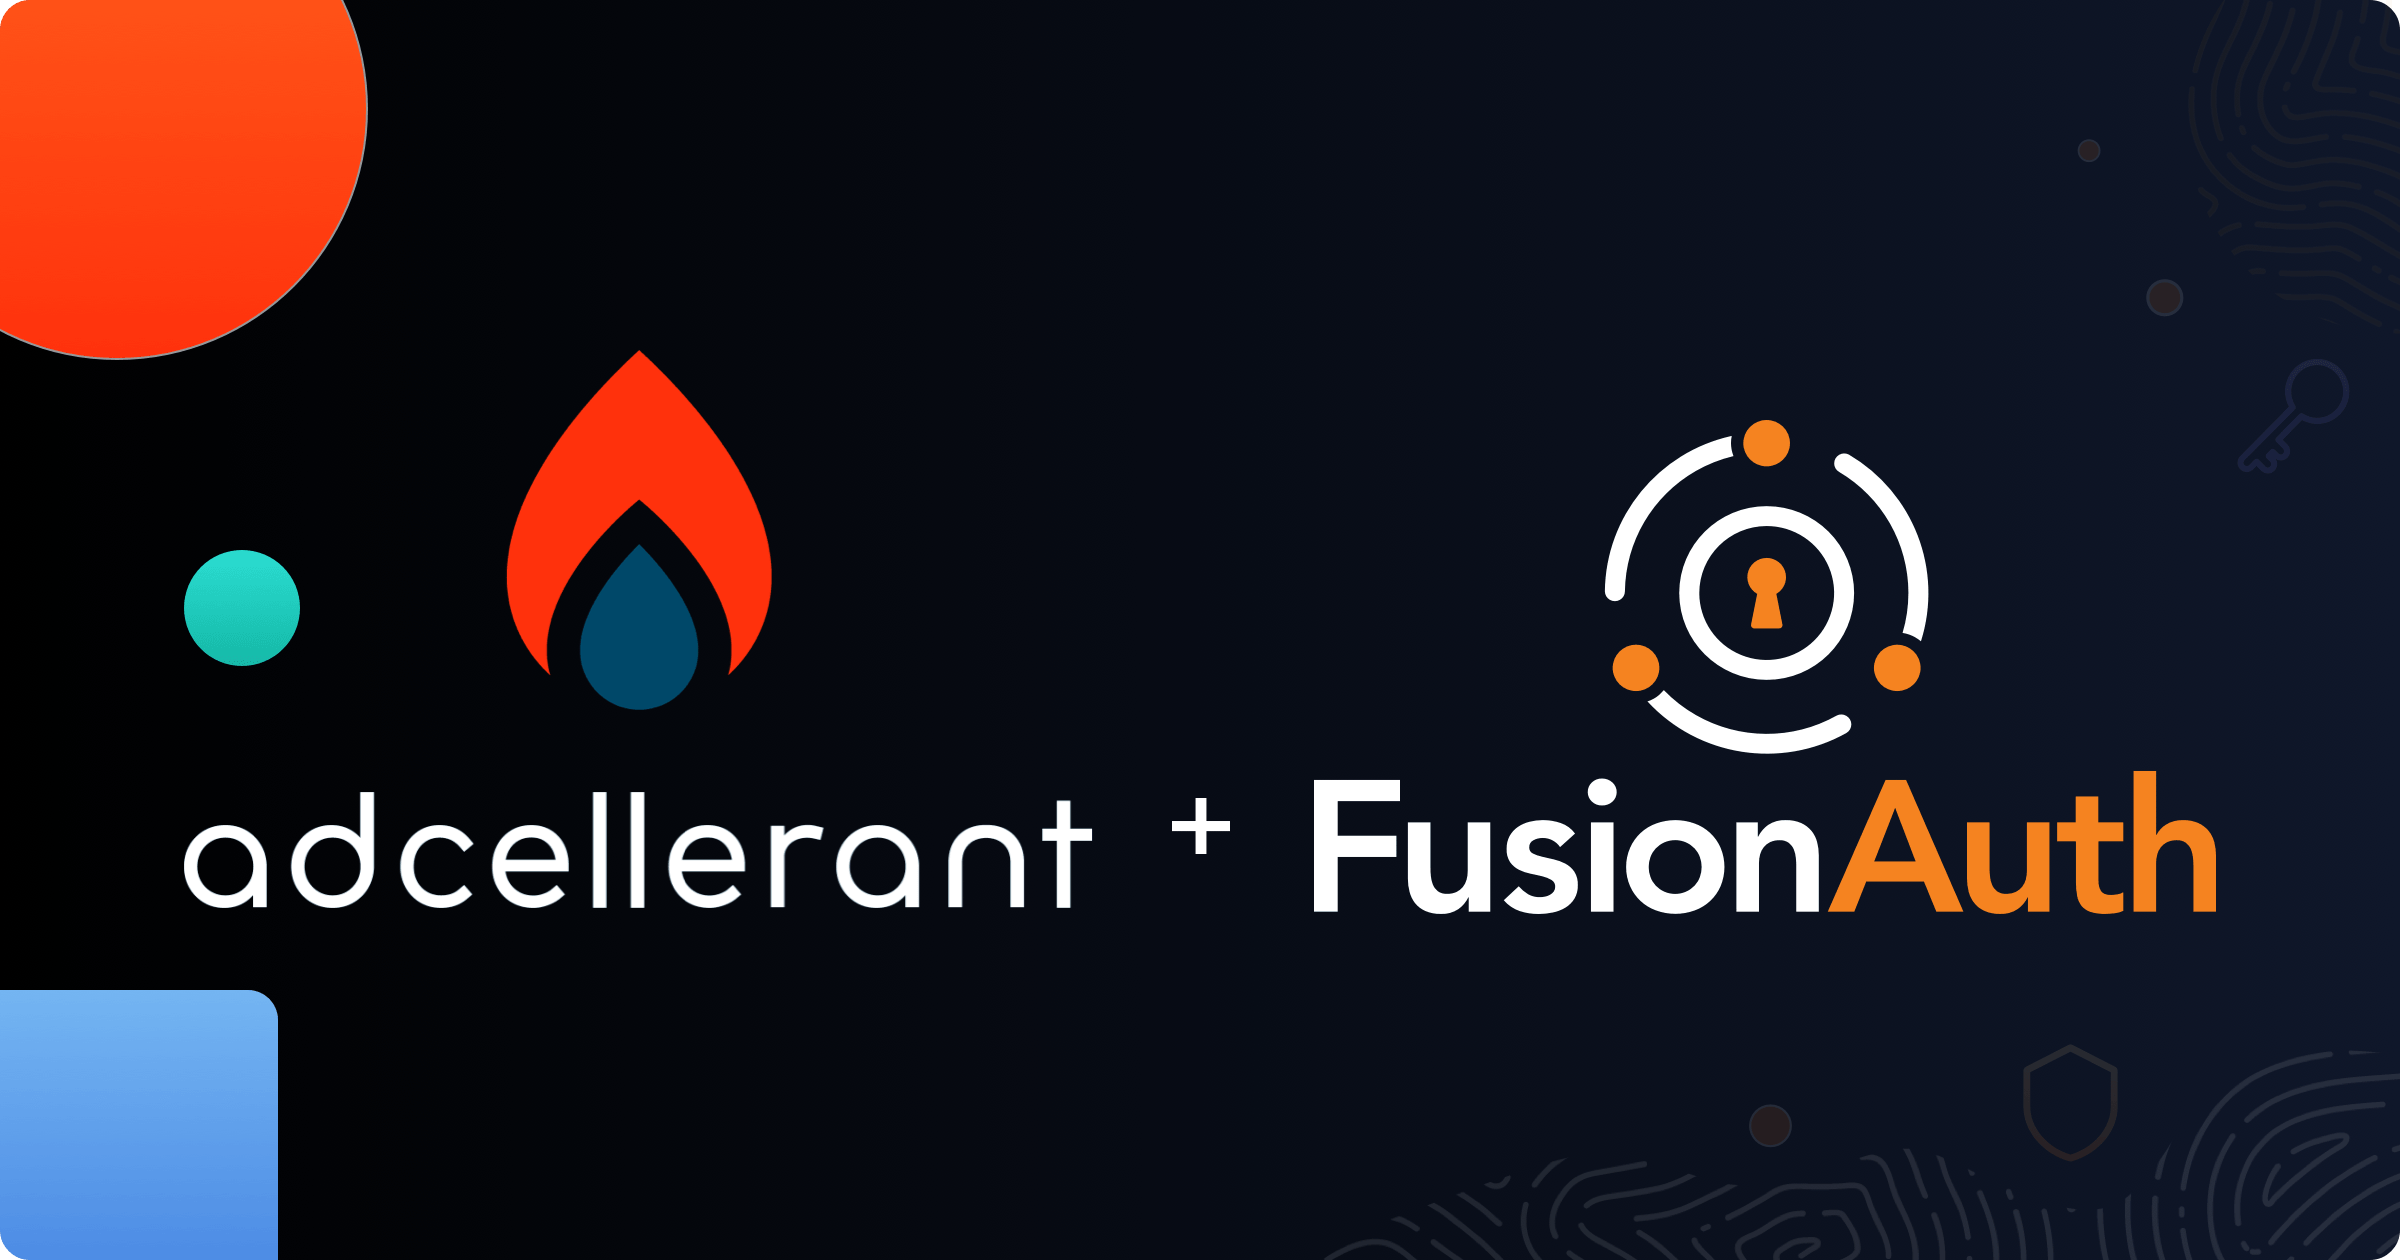 AdCellerant seamlessly migrated their data from MongoDB to FusionAuth